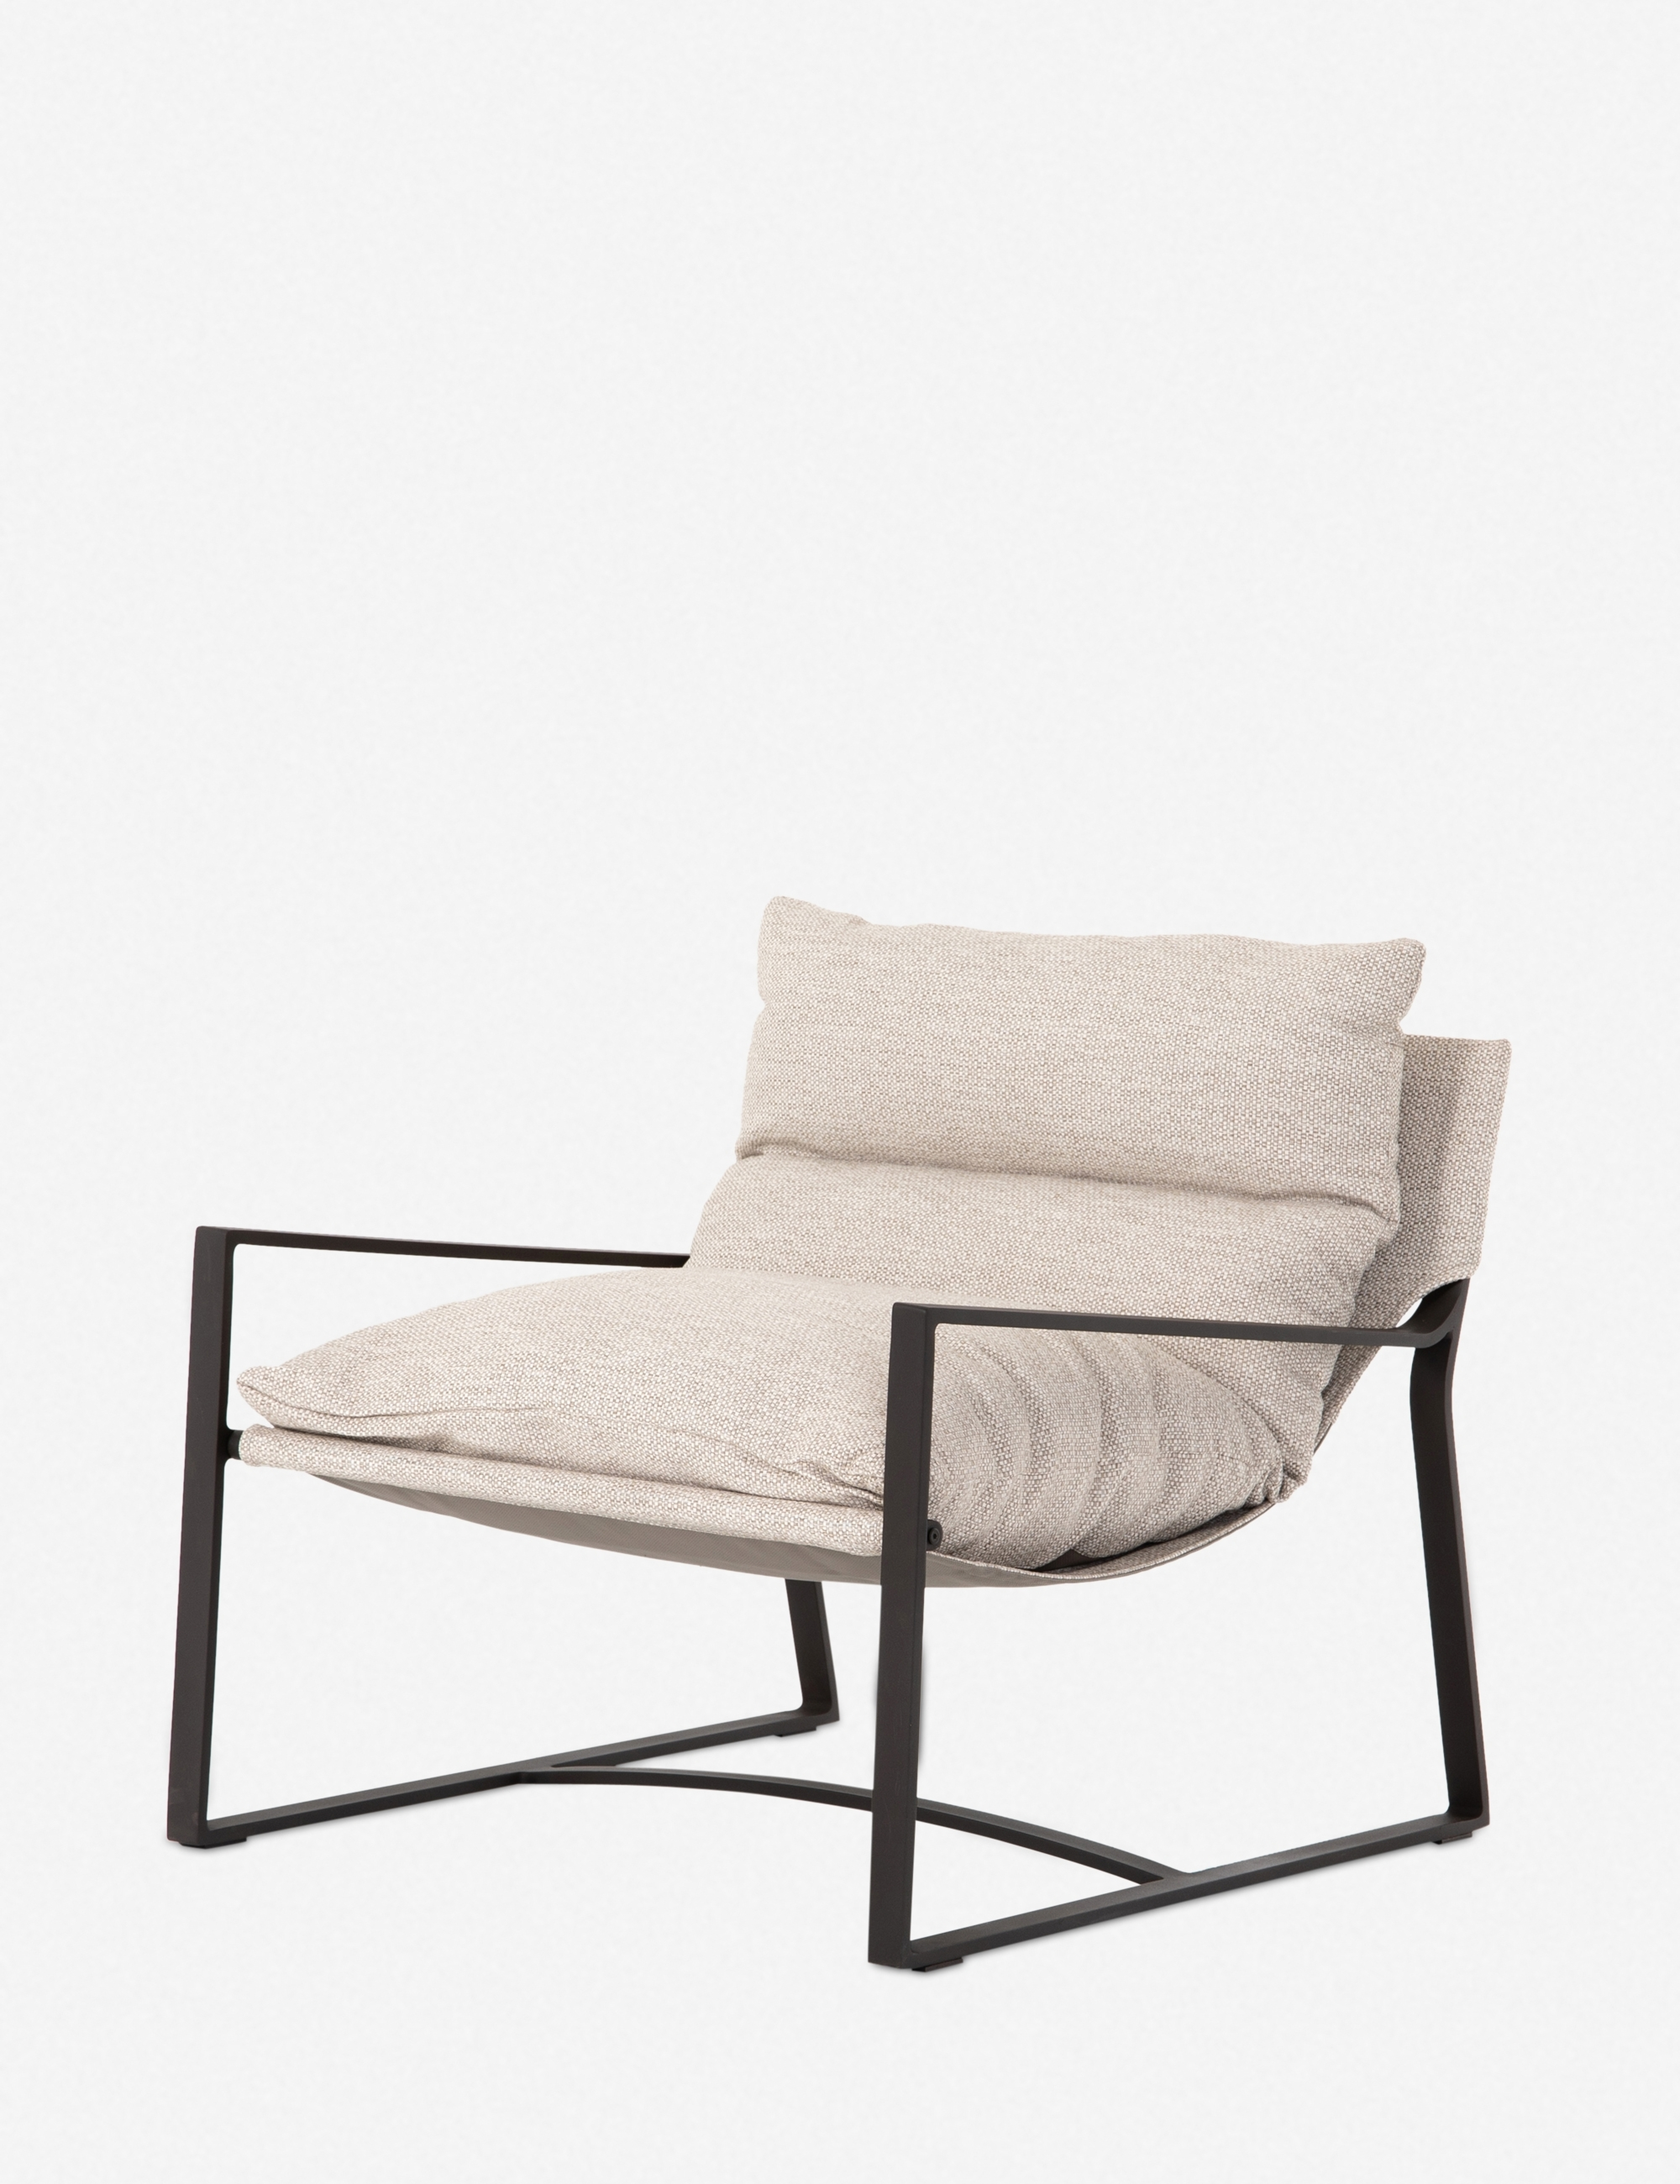 Pali Outdoor Accent Chair - Lulu and Georgia